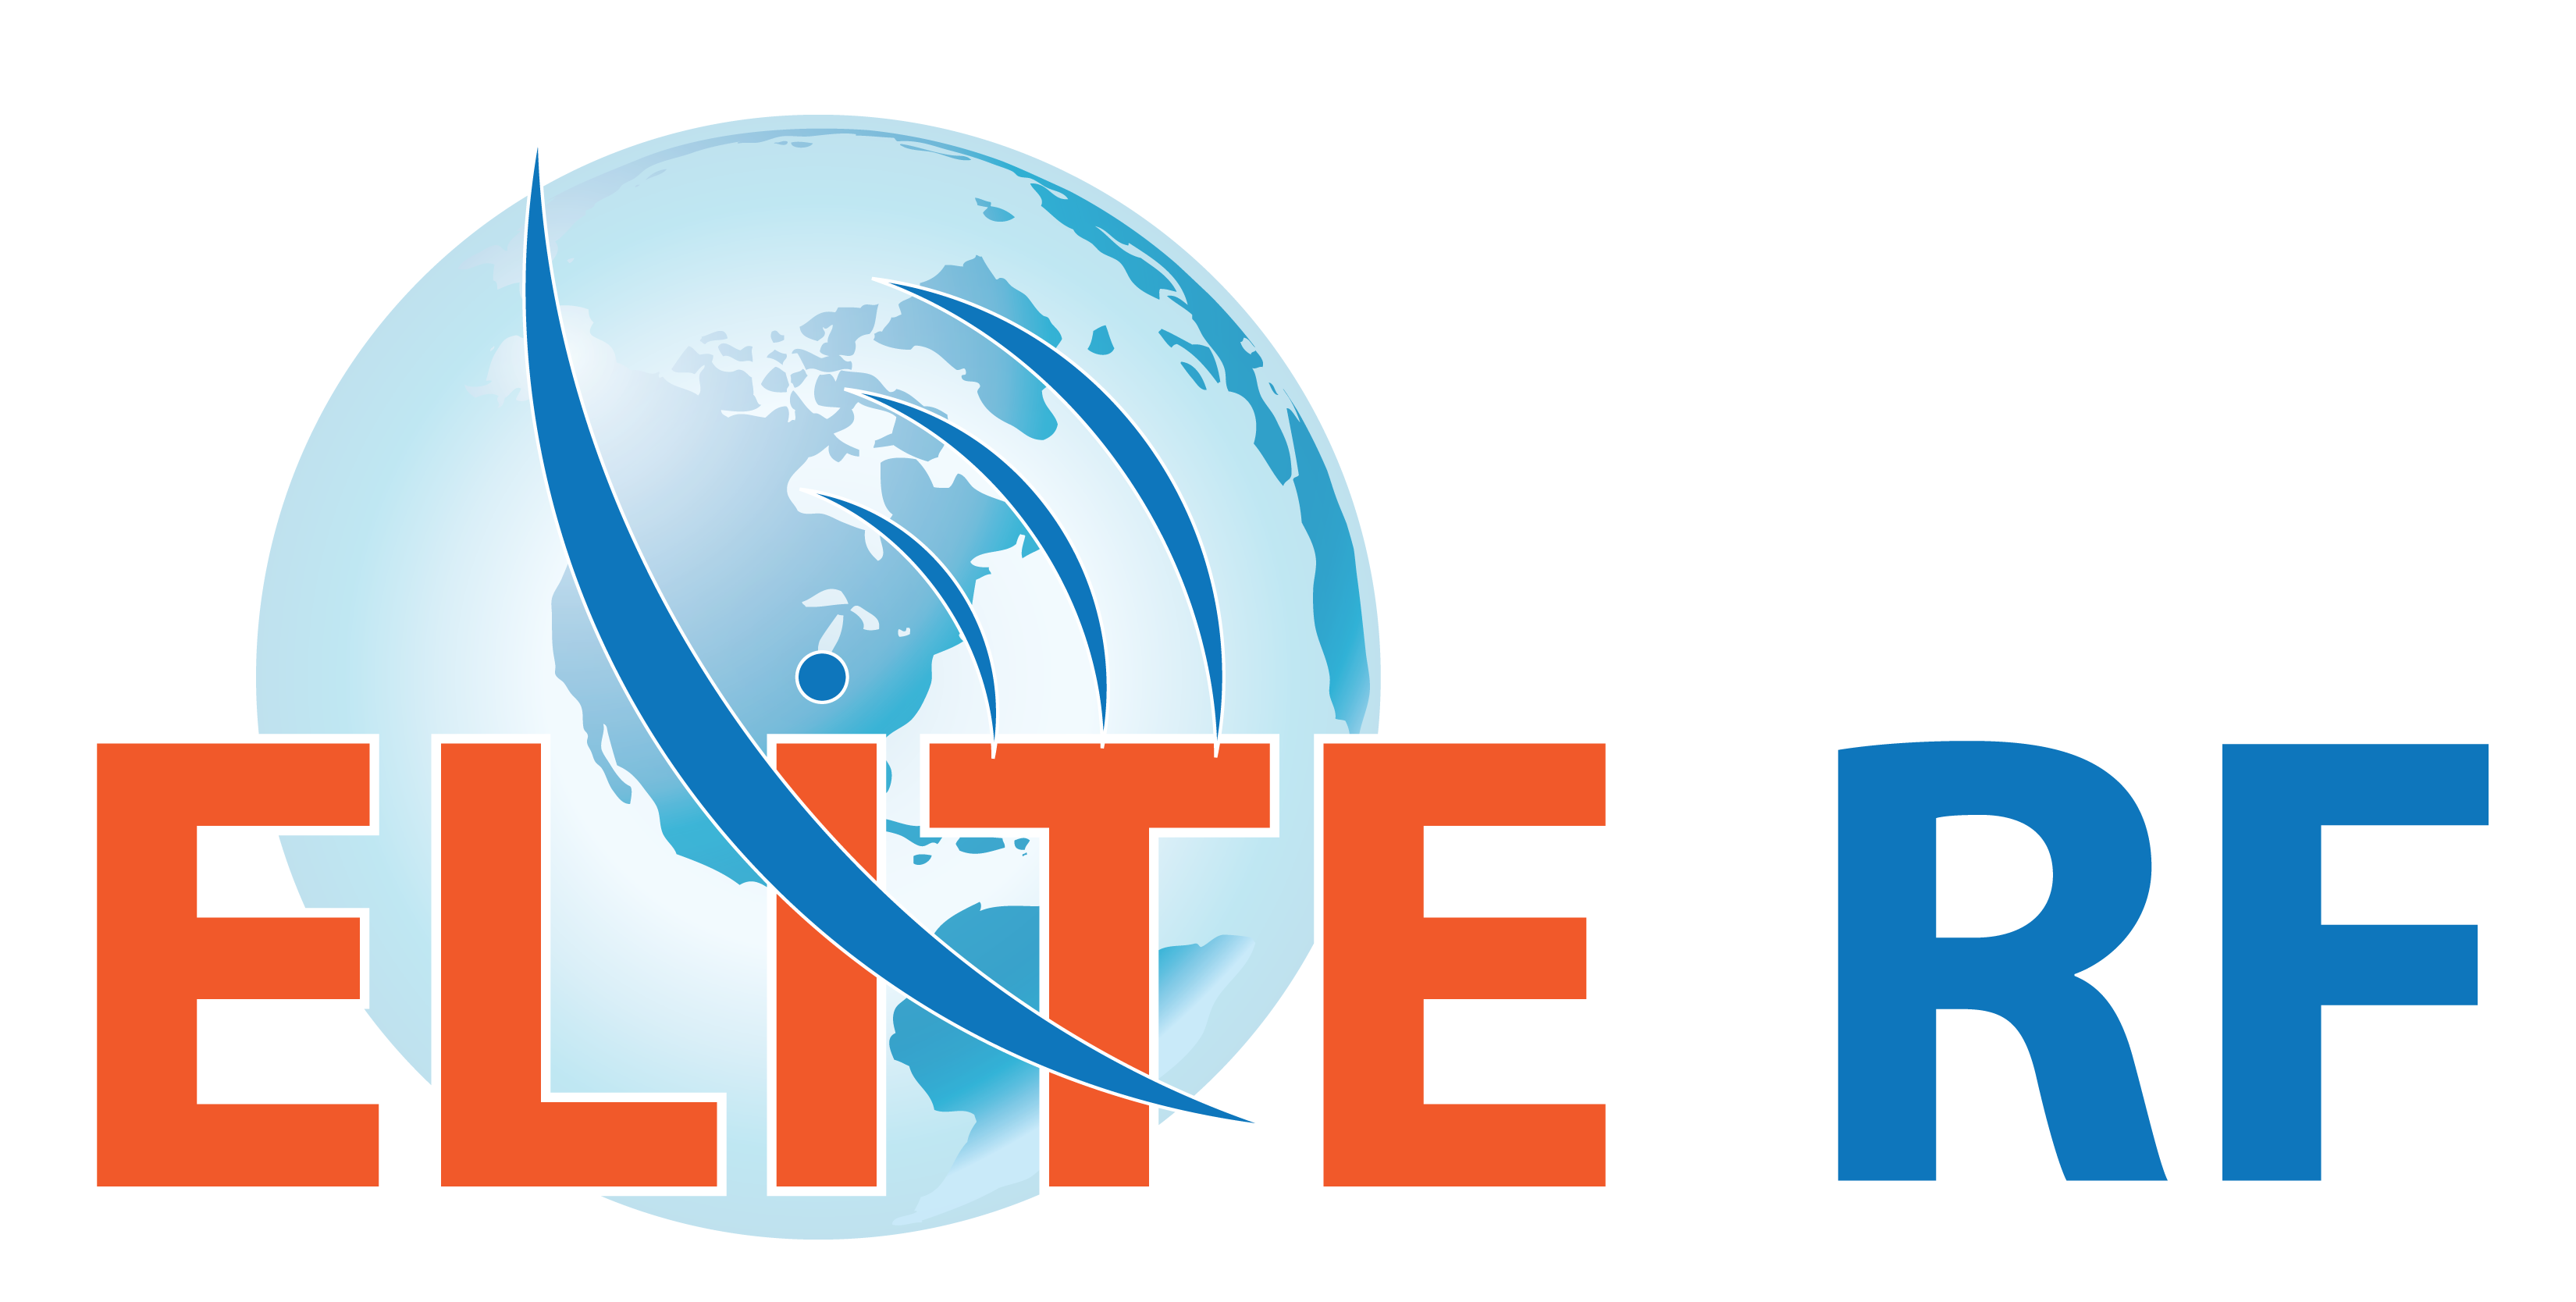 Elite RF Introduces New High-Power, Multi-Octave RF Amplifier